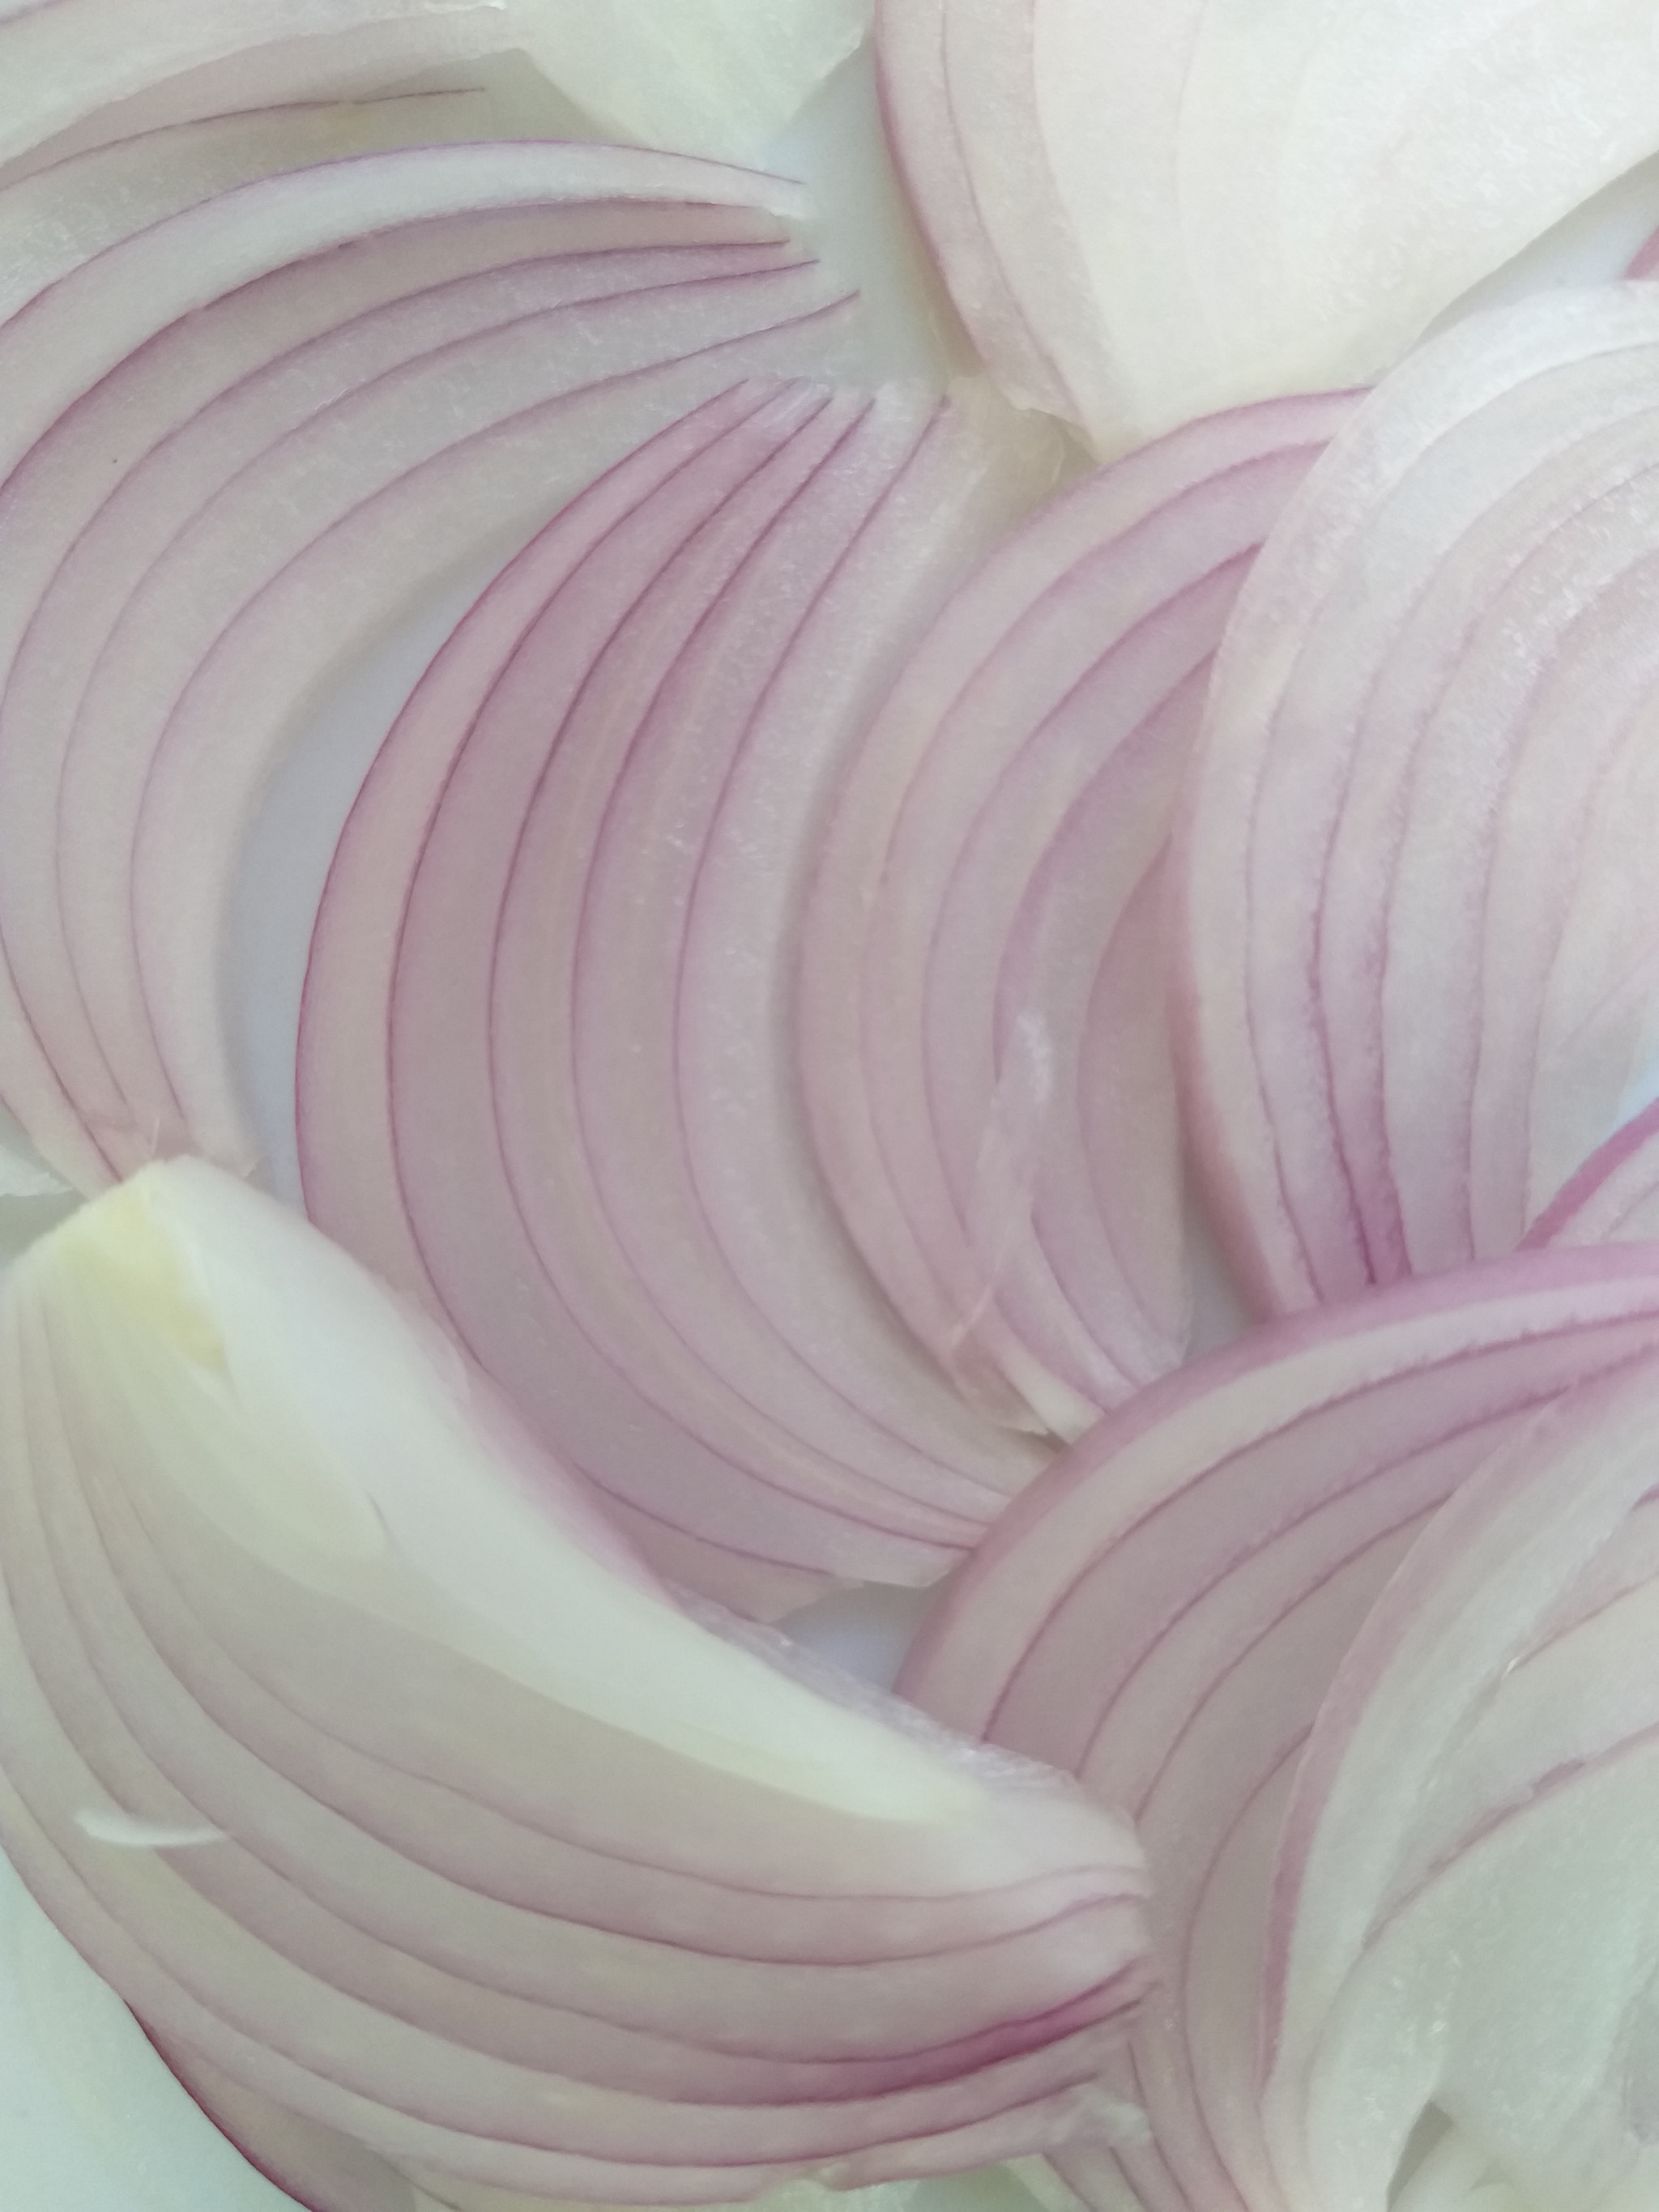 Amazing cross section of onion perfect for background for writing